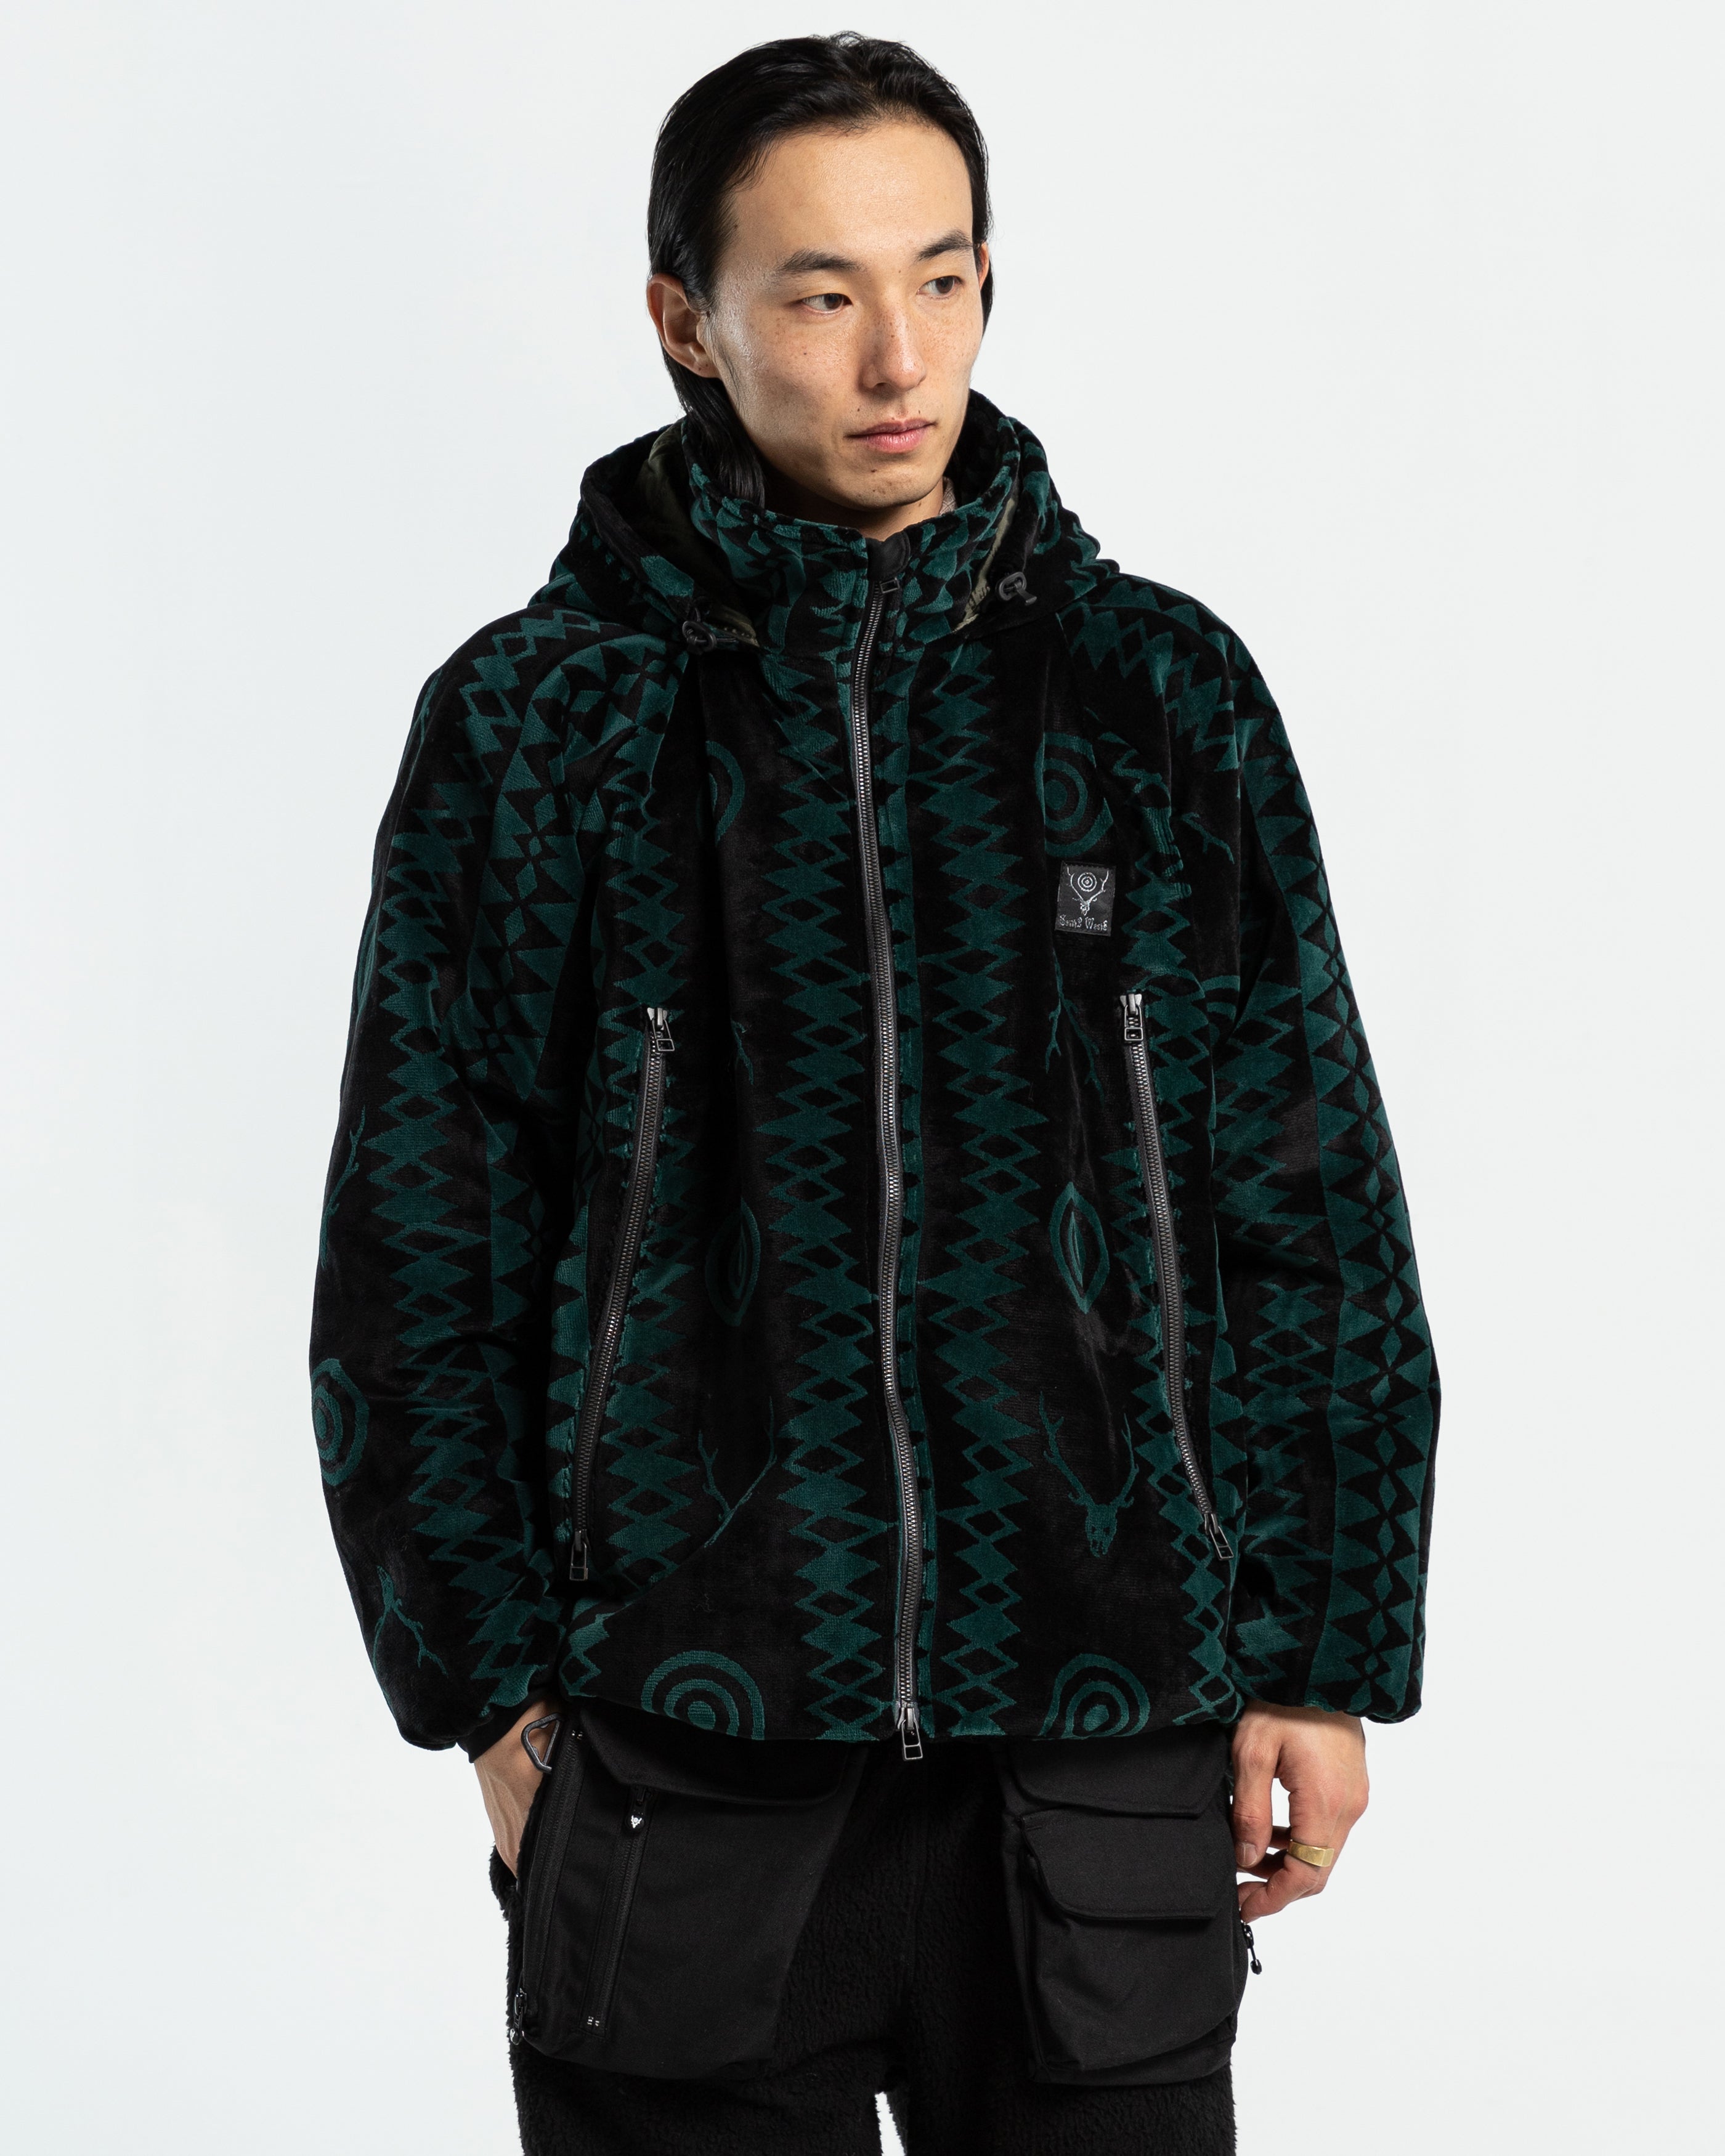 Weather Effect Jacket in Black and Green